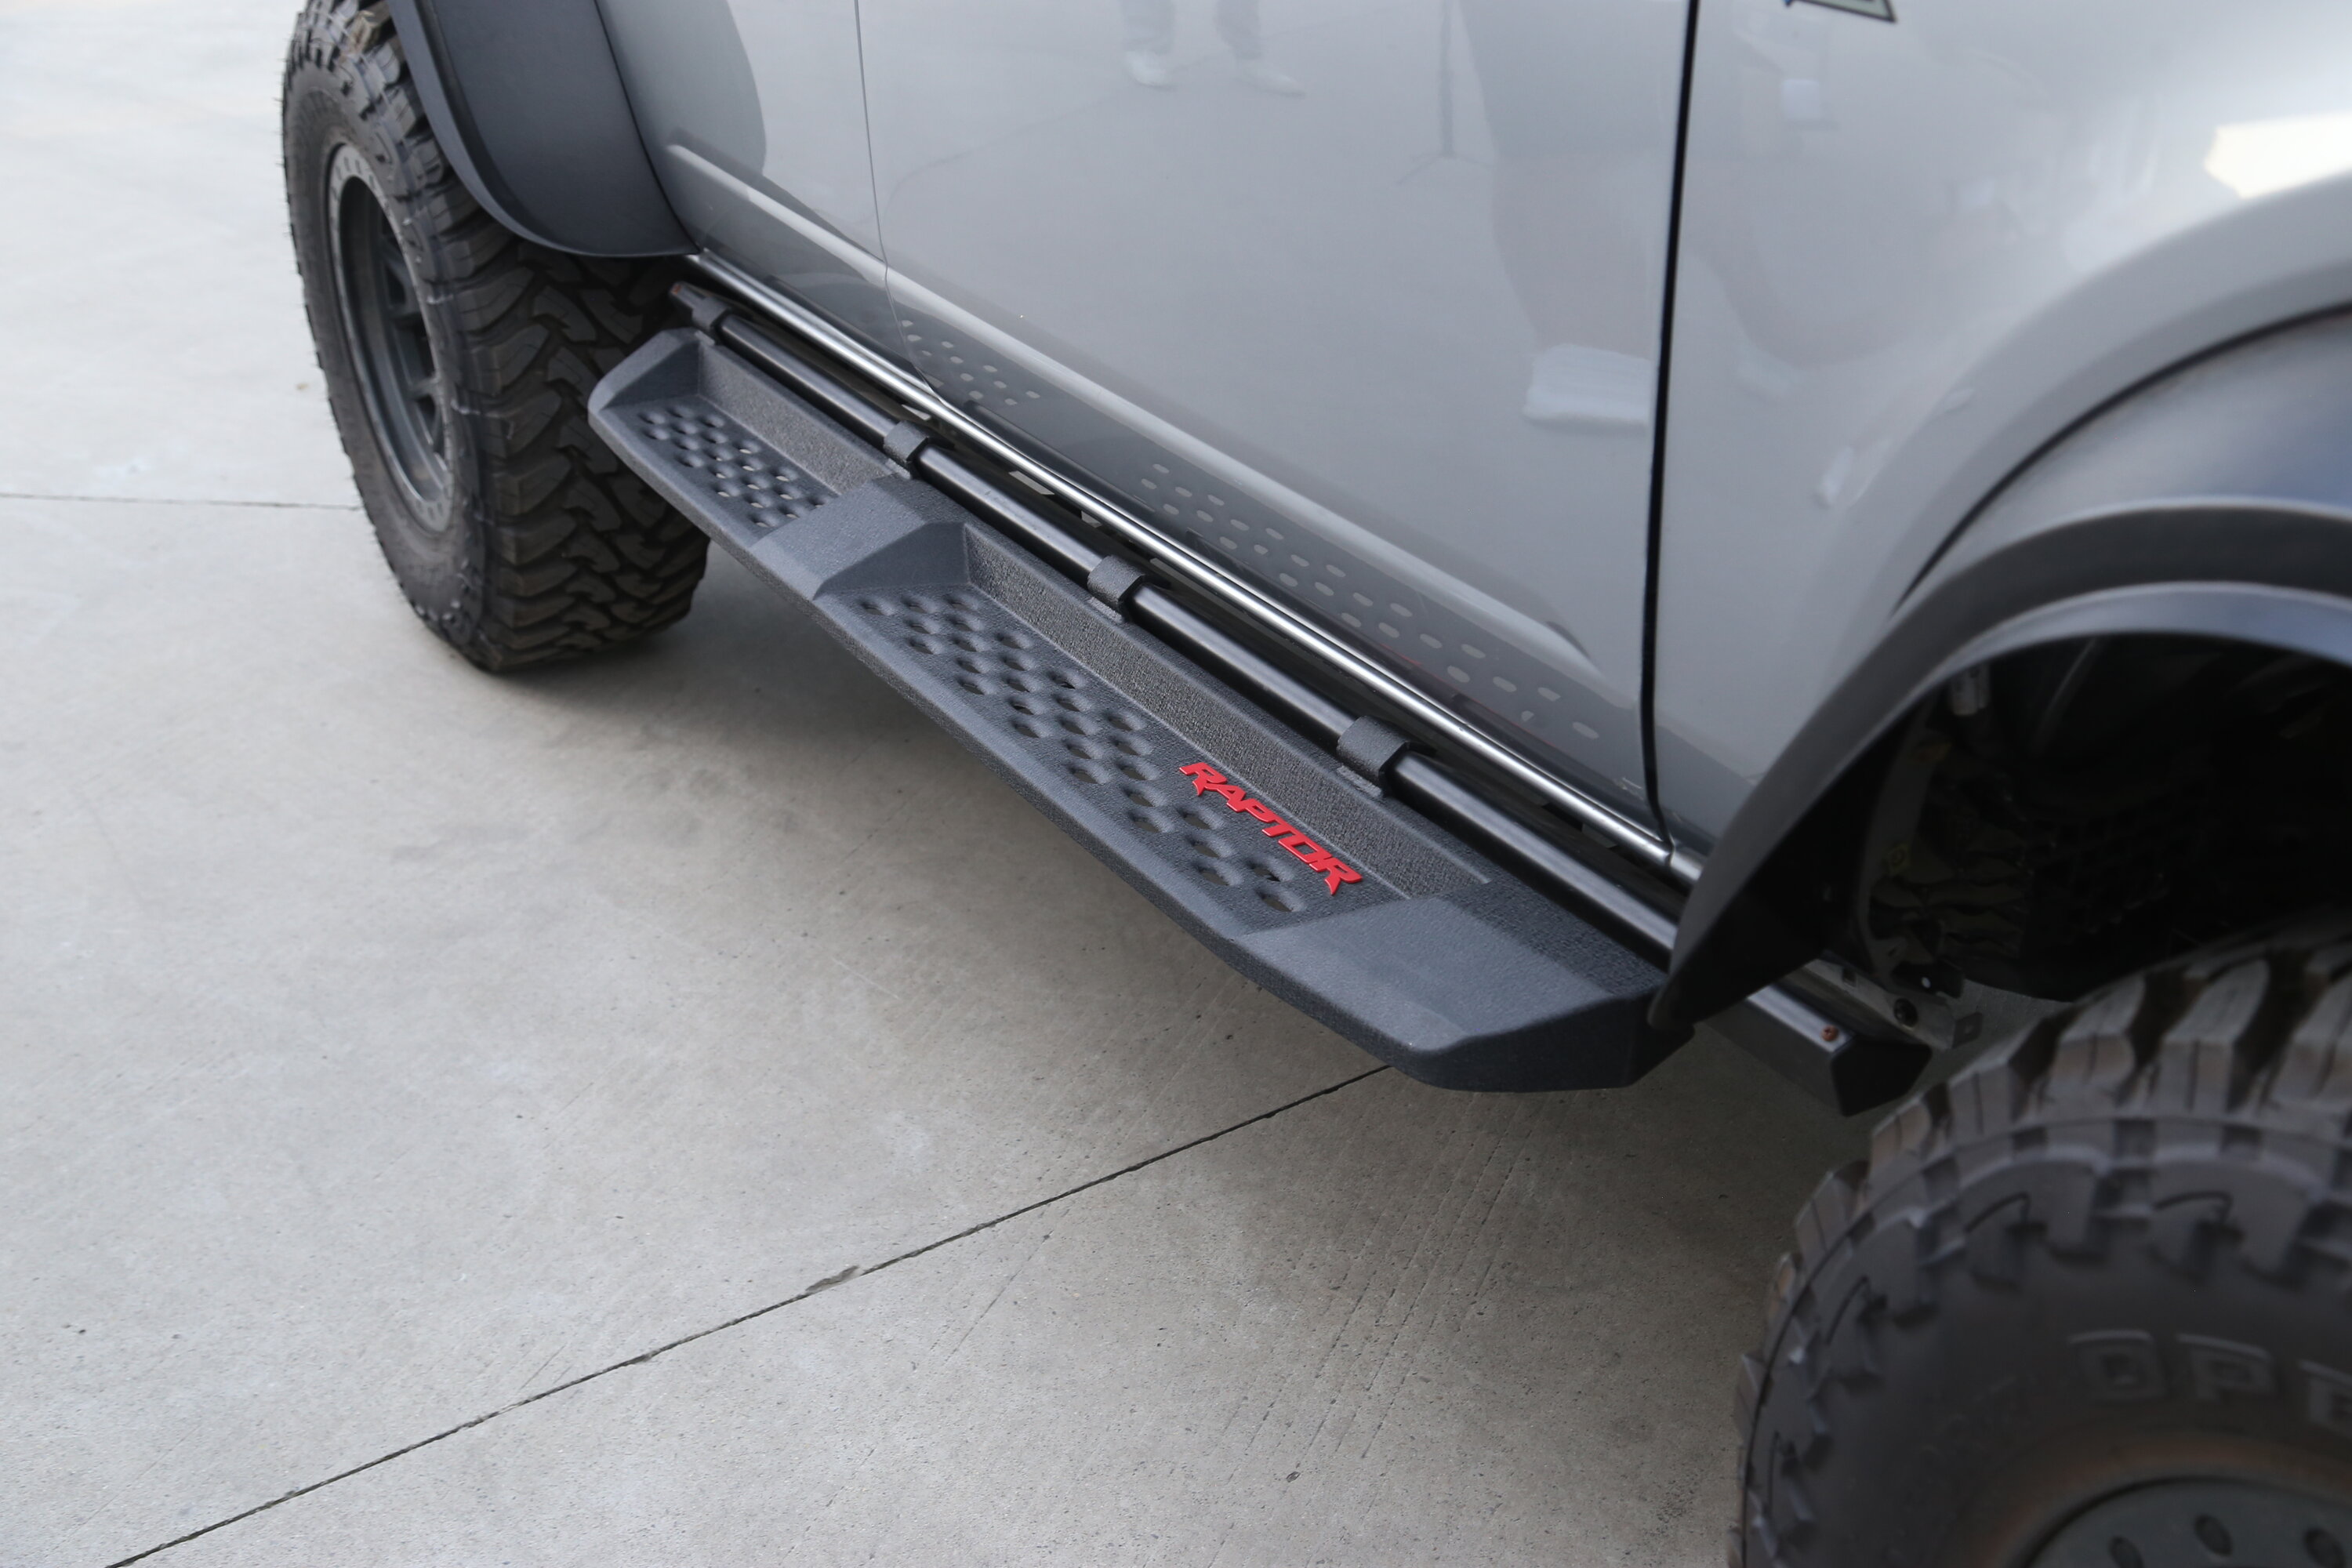 Ford Bronco Mabett Raptor Style Running Board Available Now! IMG_0054.JPG